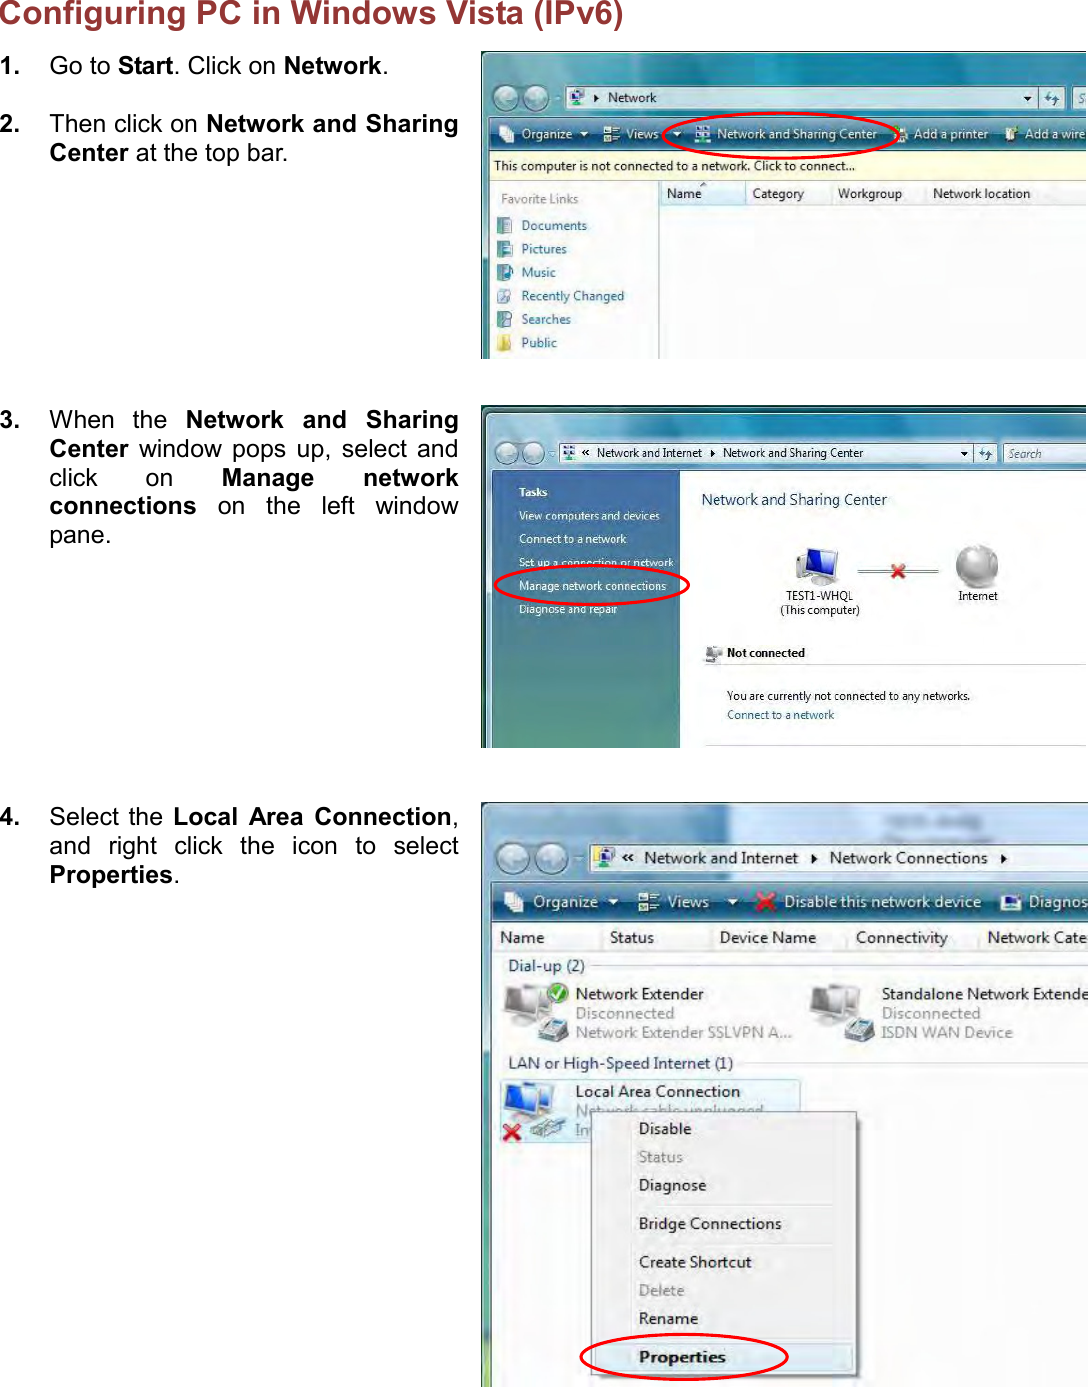    Configuring PC in Windows Vista (IPv6)  1. Go to Start. Click on Network.  2. Then click on Network and Sharing Center at the top bar.  3. When  the  Network  and  Sharing Center  window  pops  up,  select  and click  on  Manage  network connections  on  the  left  window pane.  4. Select the Local  Area  Connection, and  right  click  the  icon  to  select Properties.  